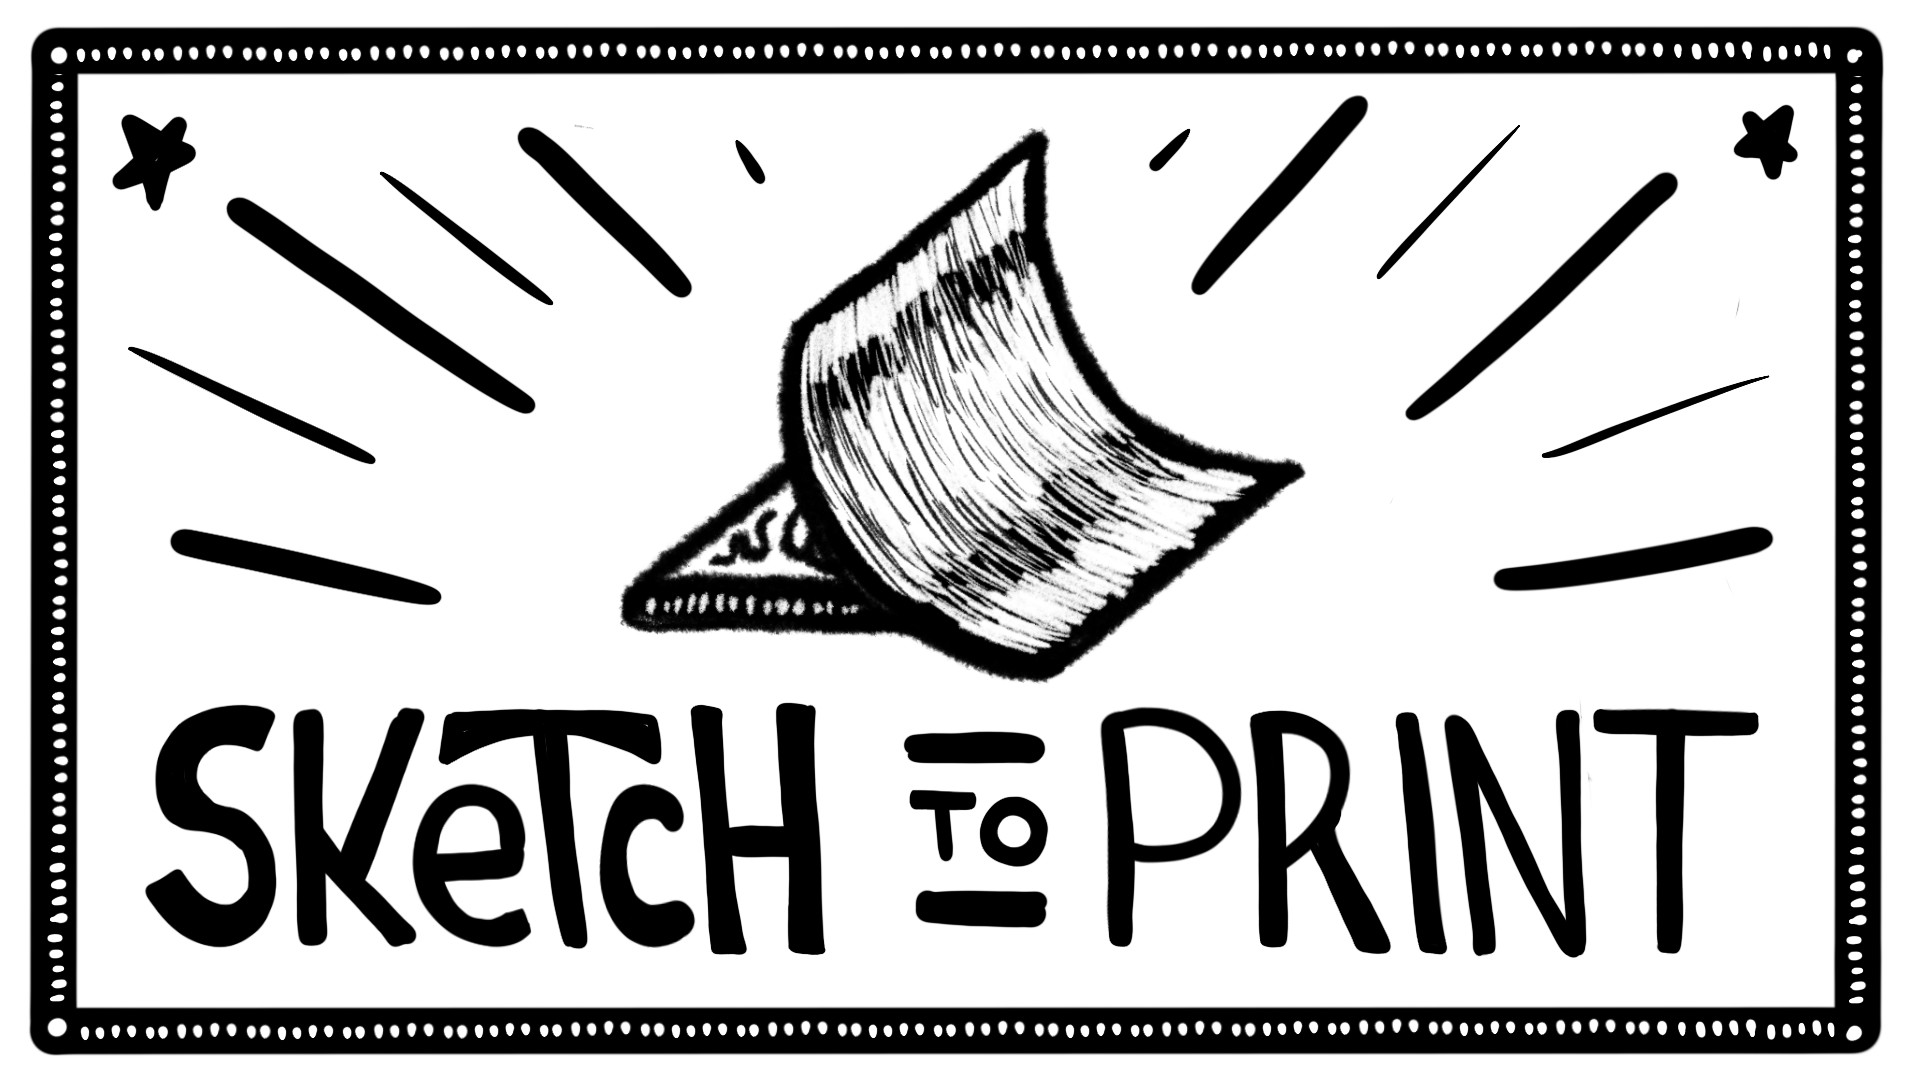 Sketch to Print! Tuesday 7:30PM MST.